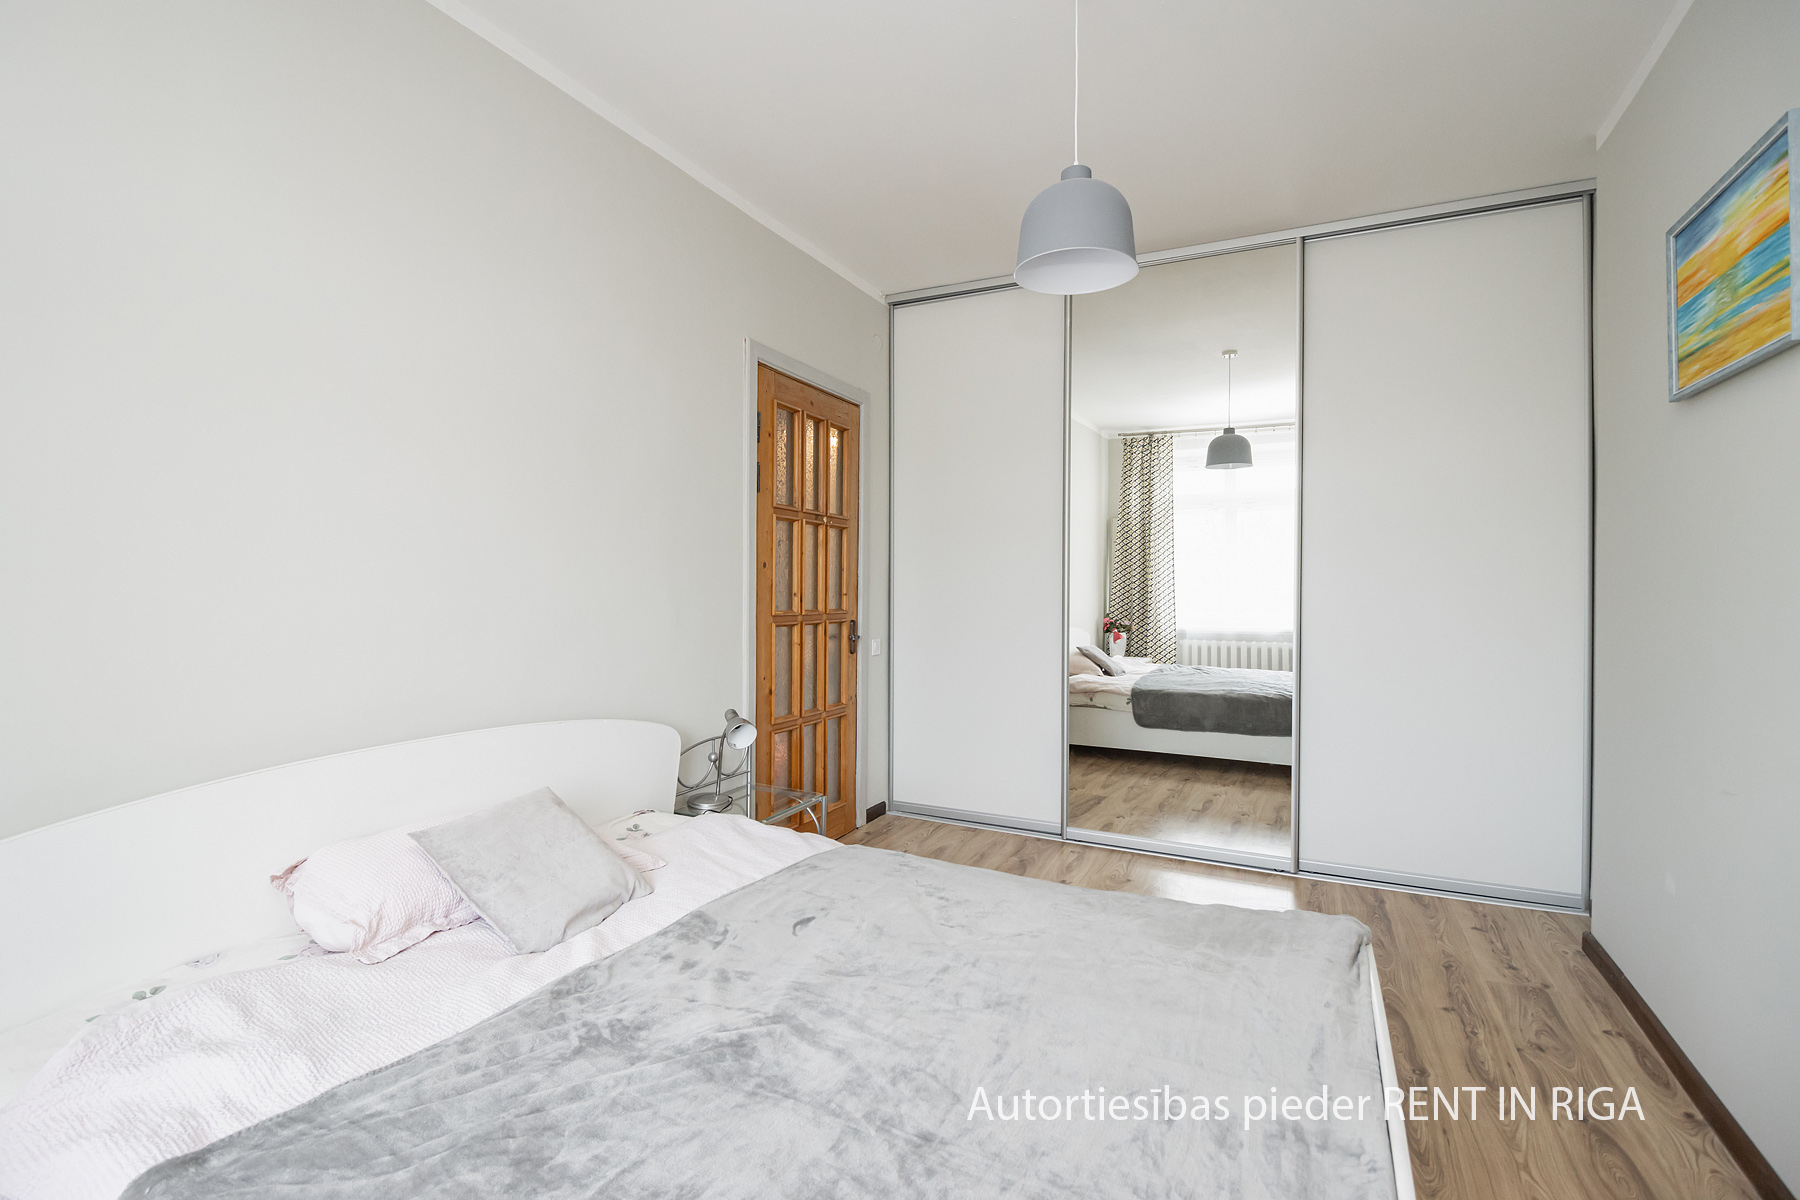 Apartment for rent, Citadeles street 5 - Image 1